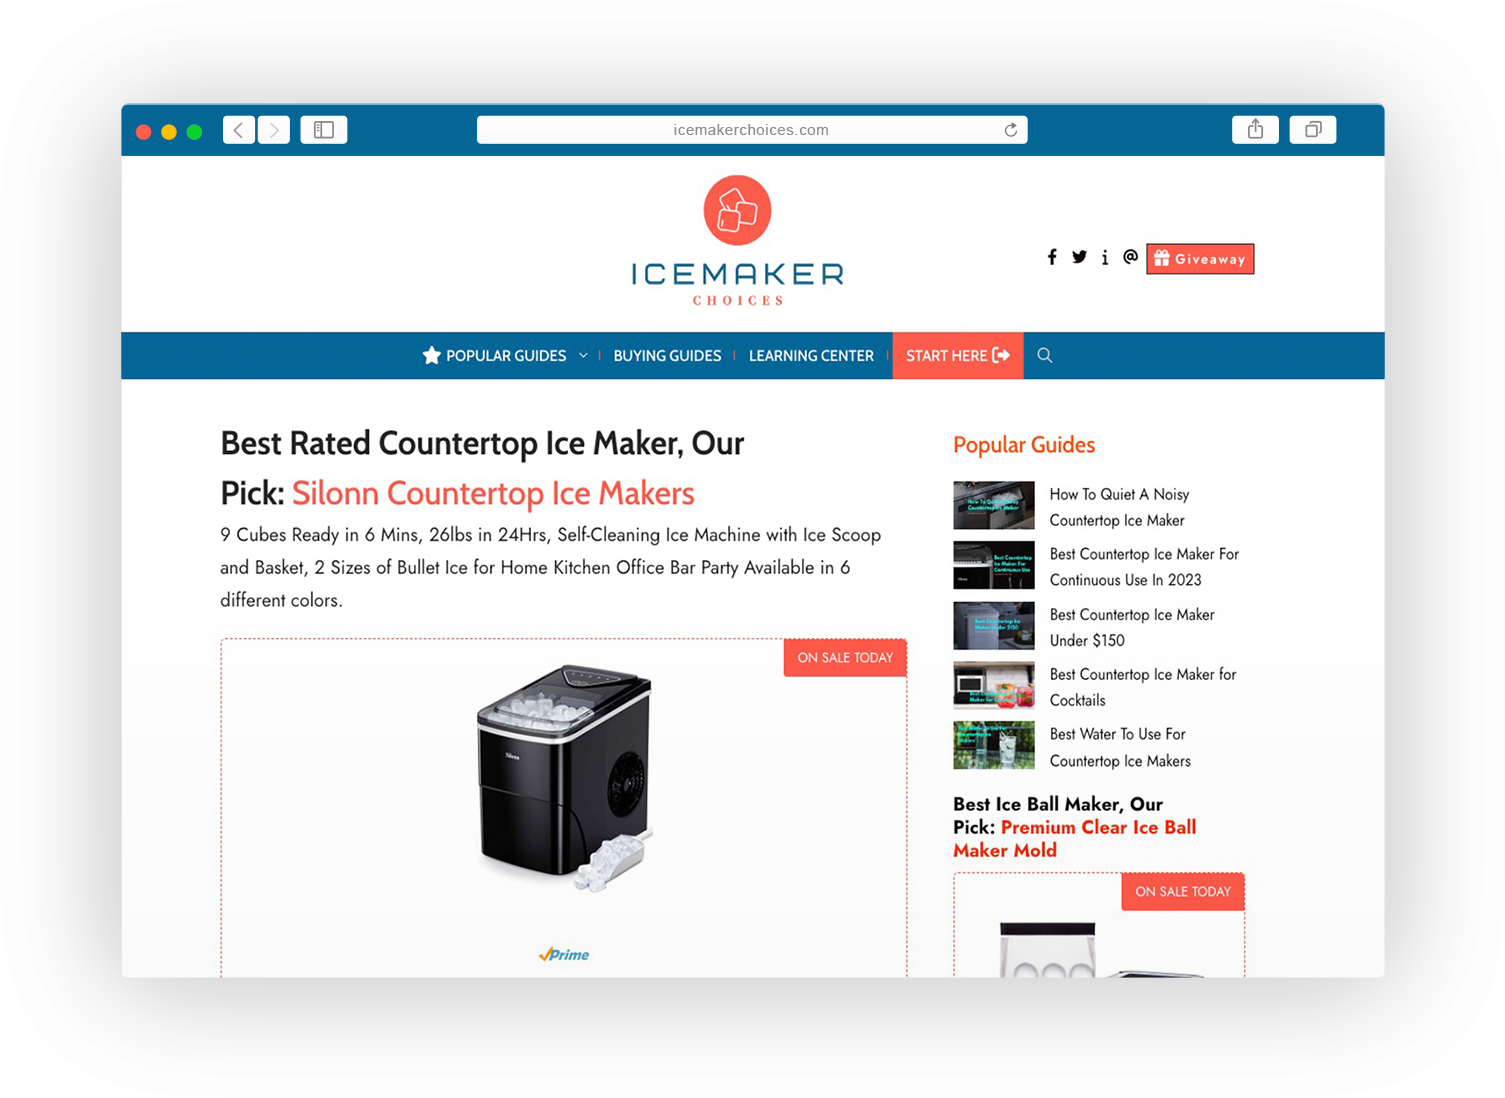 IceMakerChoices - A professionally designed affiliate website that promotes a range of ice Maker Appliances